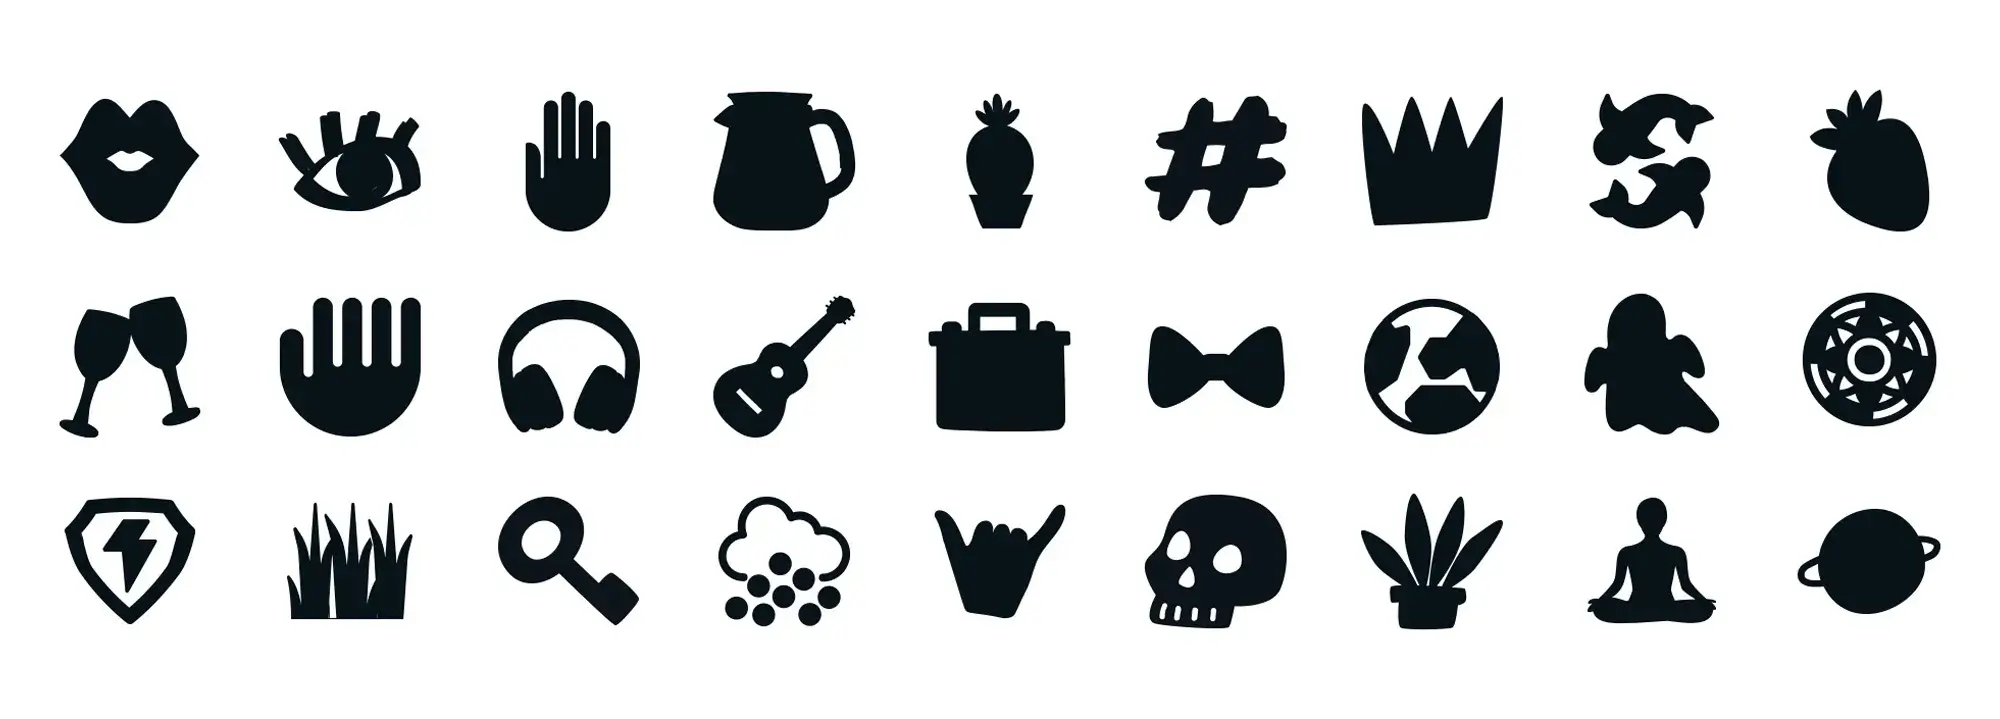 Free WordPress icons library: perfect for website customization